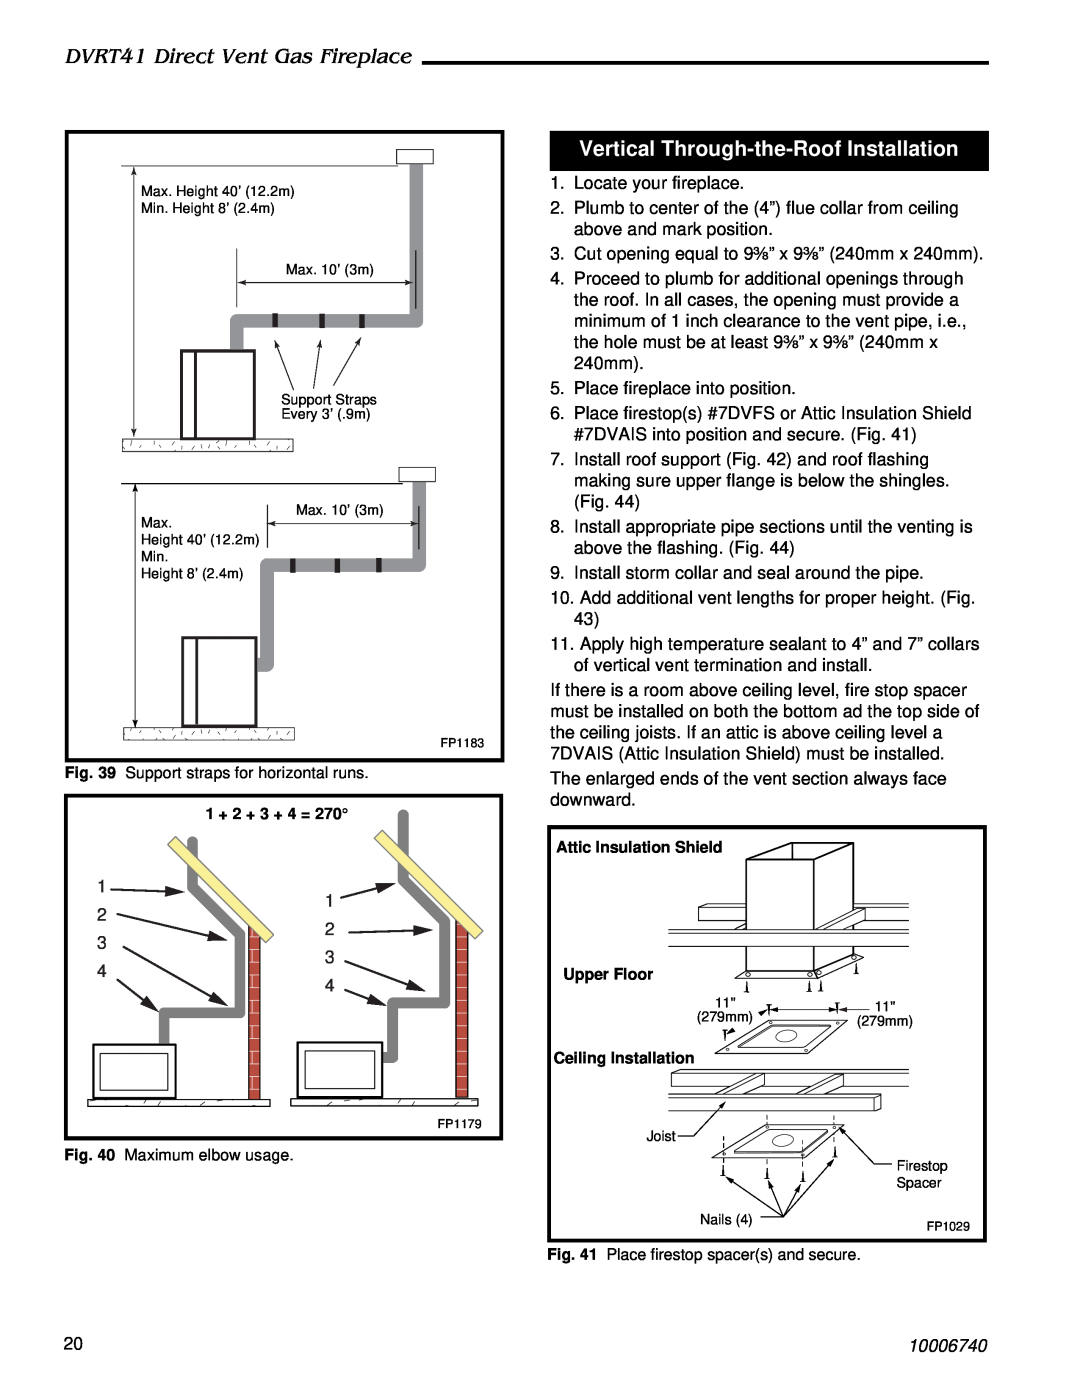 Vermont Casting manual Vertical Through-the-RoofInstallation, DVRT41 Direct Vent Gas Fireplace, 10006740 